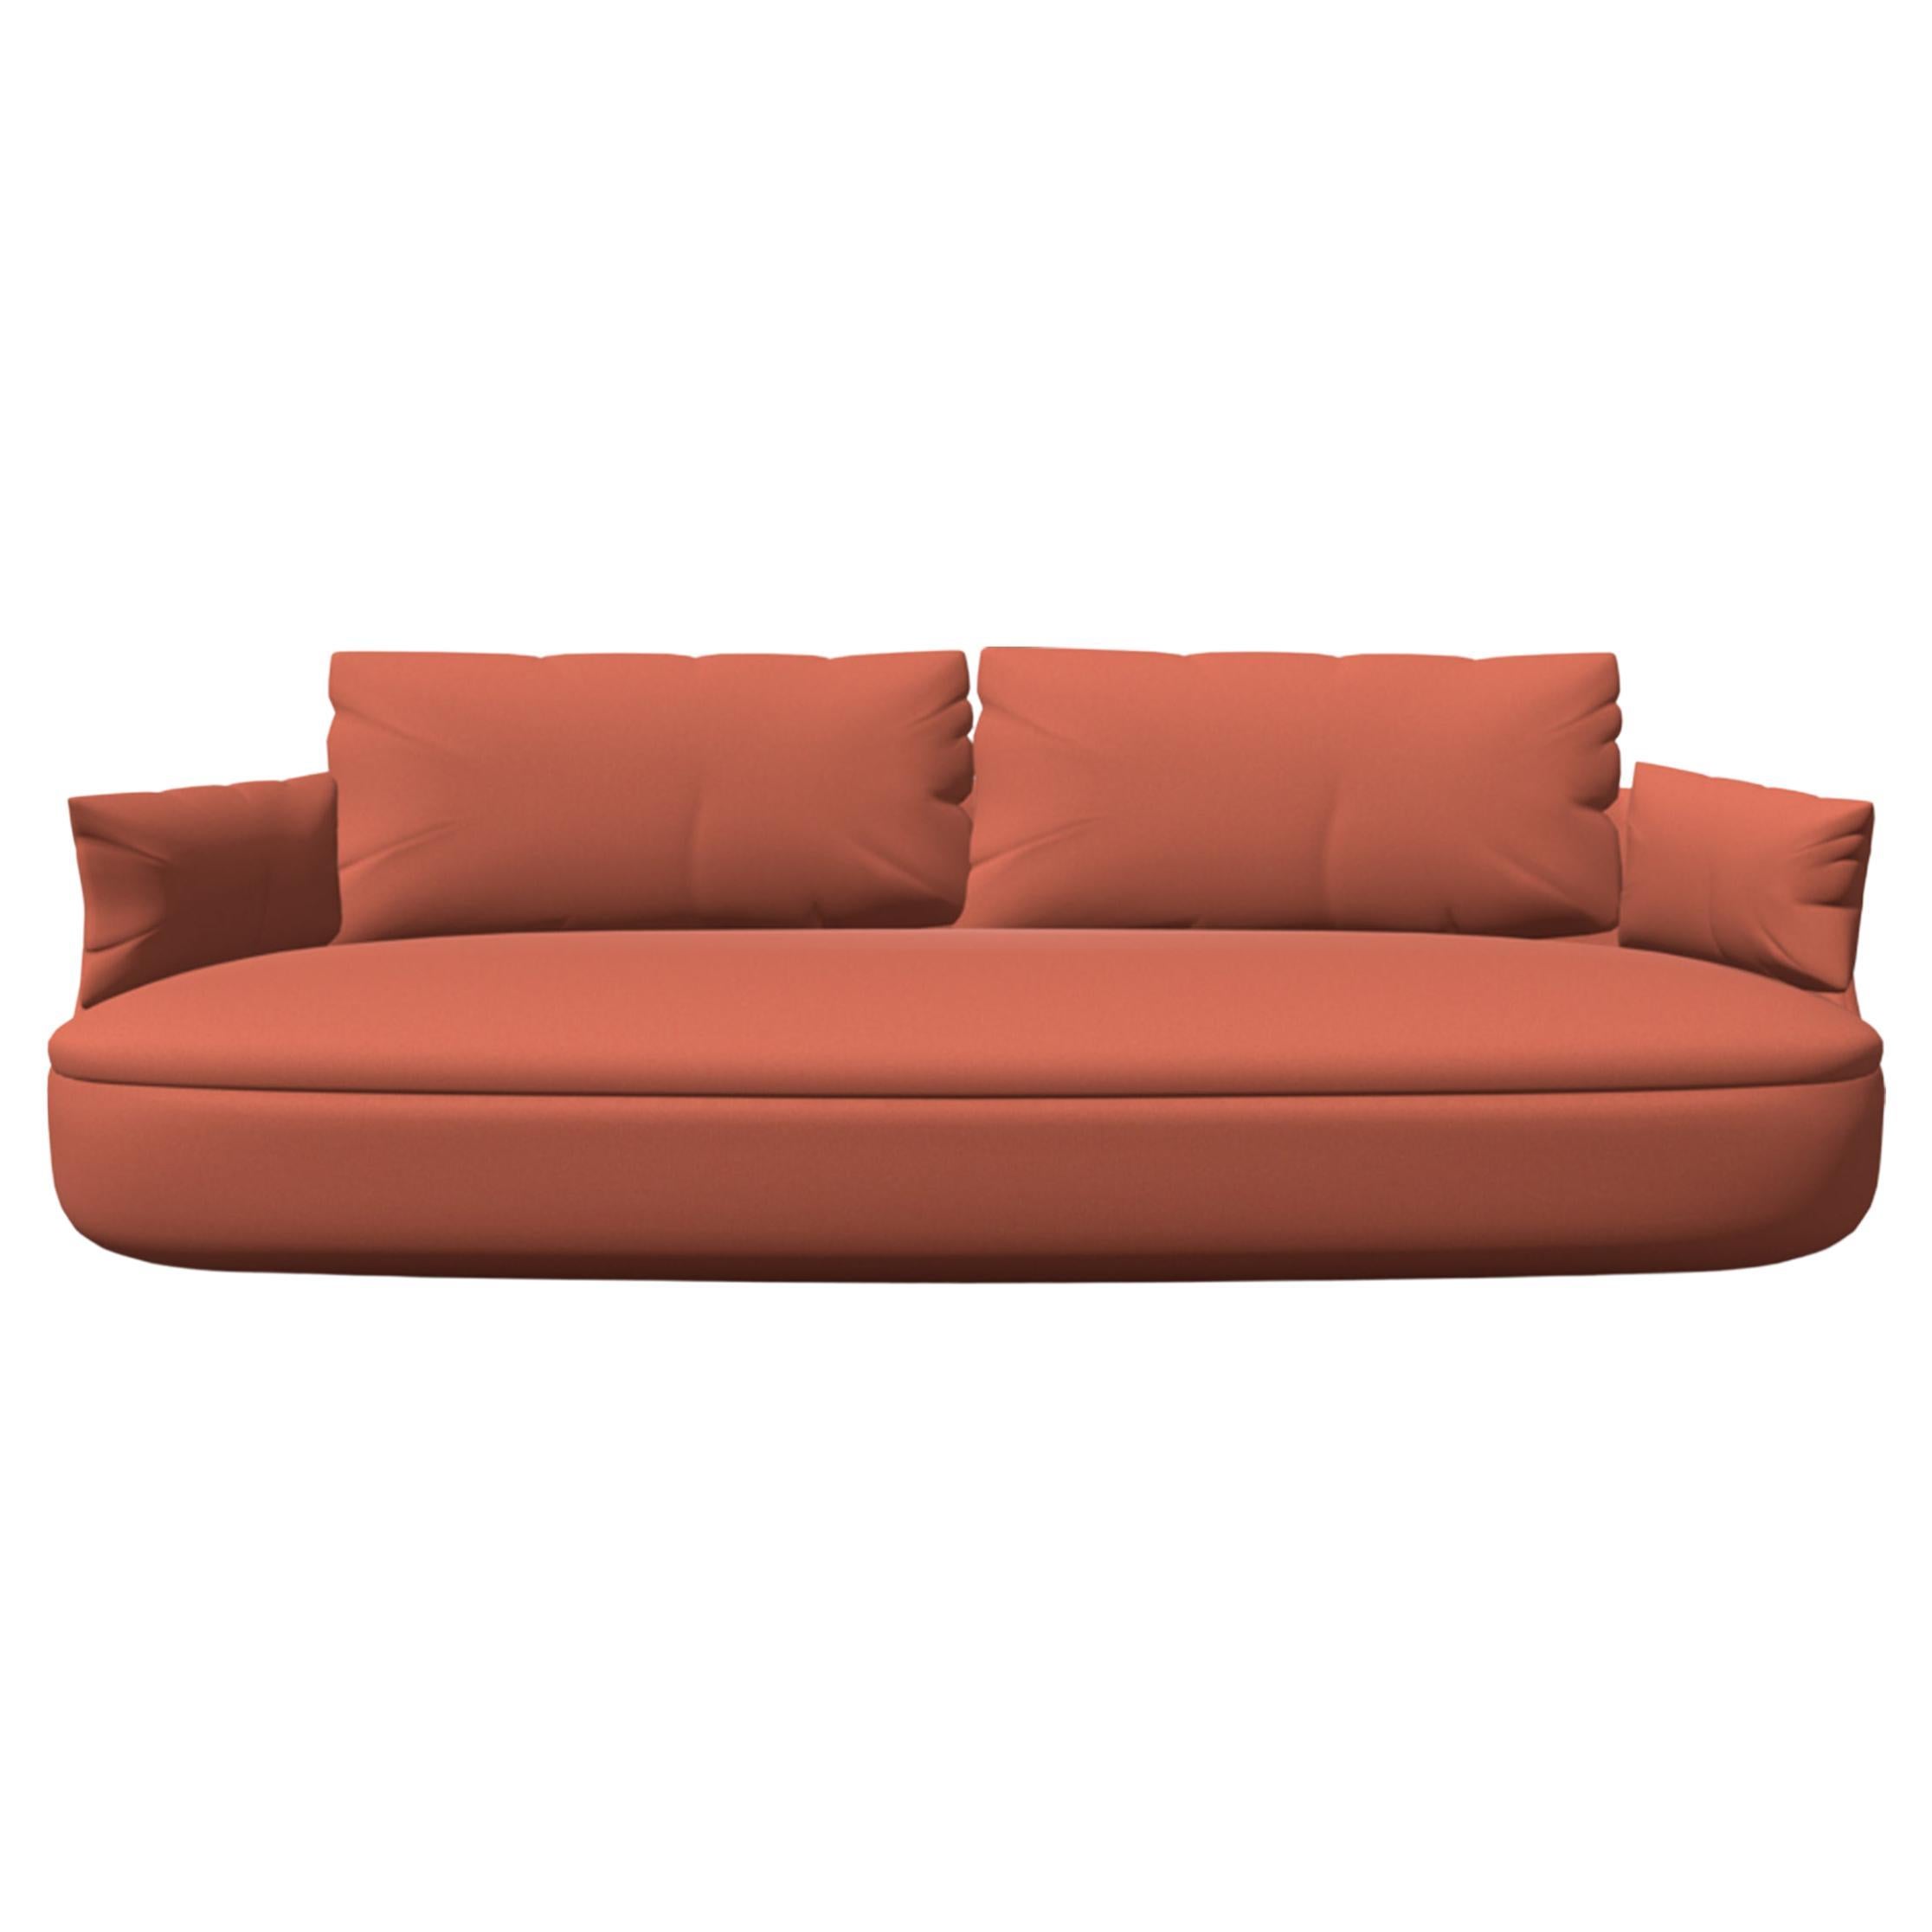 Moooi Bart Basic Sofa in Steelcut 2, 550 Pink Upholstery For Sale